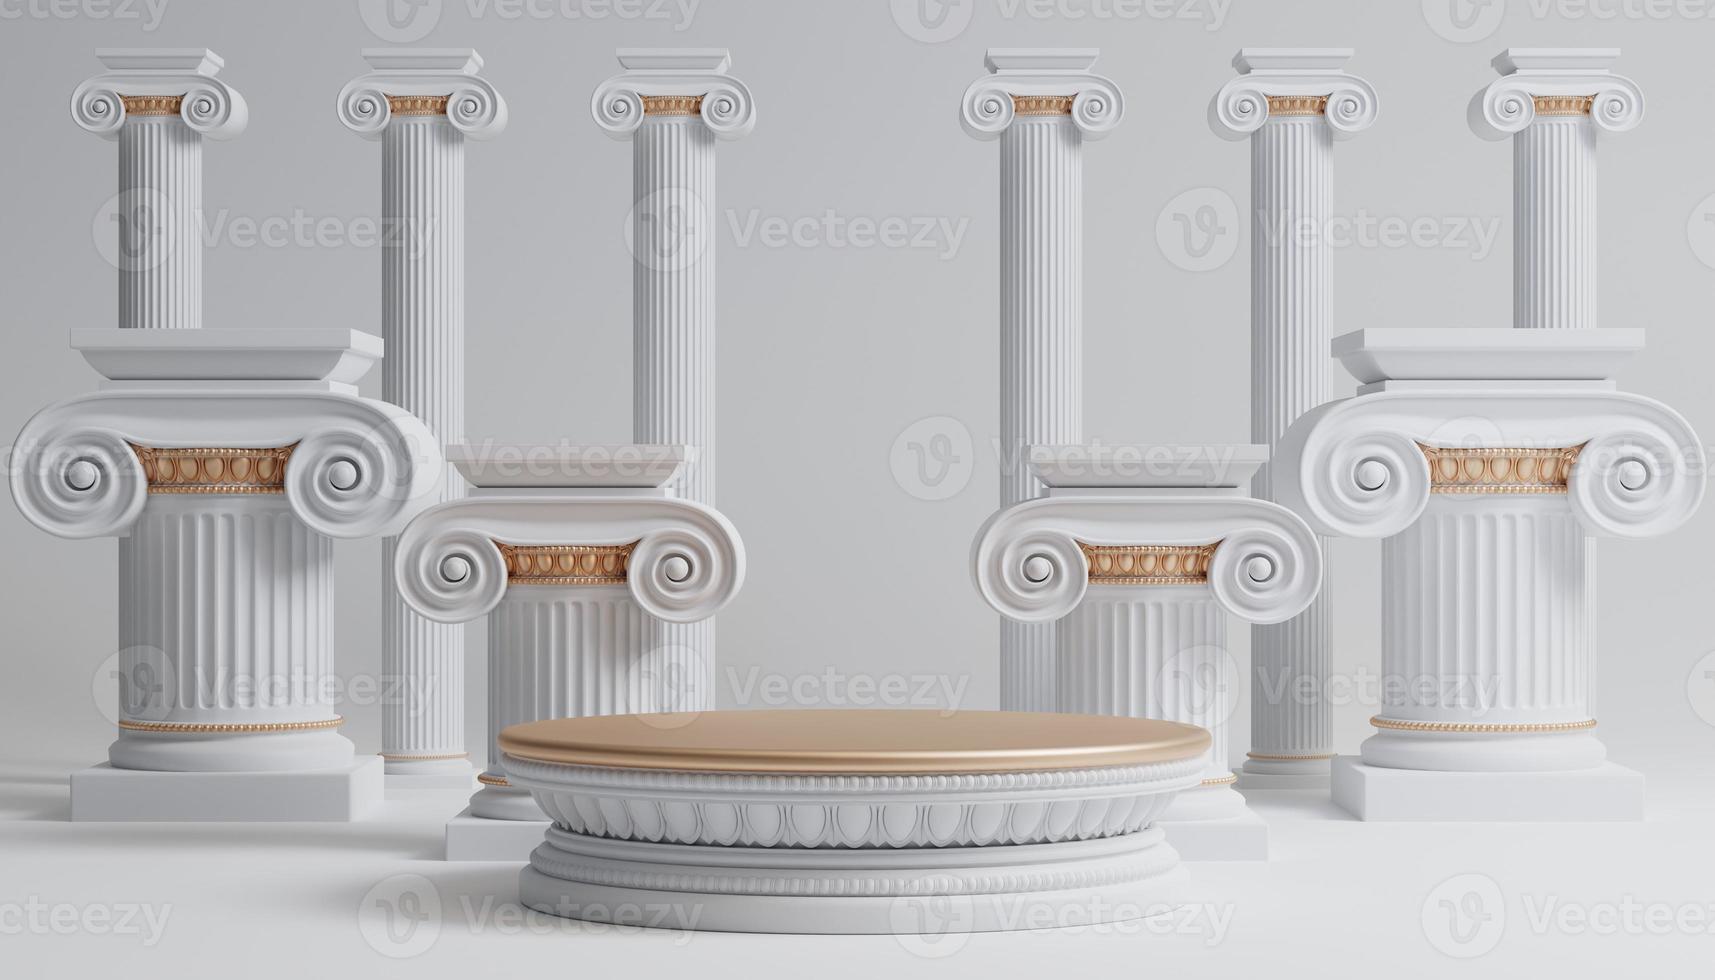 3d luxury podium with roman column for product background with white background for branding presentation 3d rendering illustration. photo